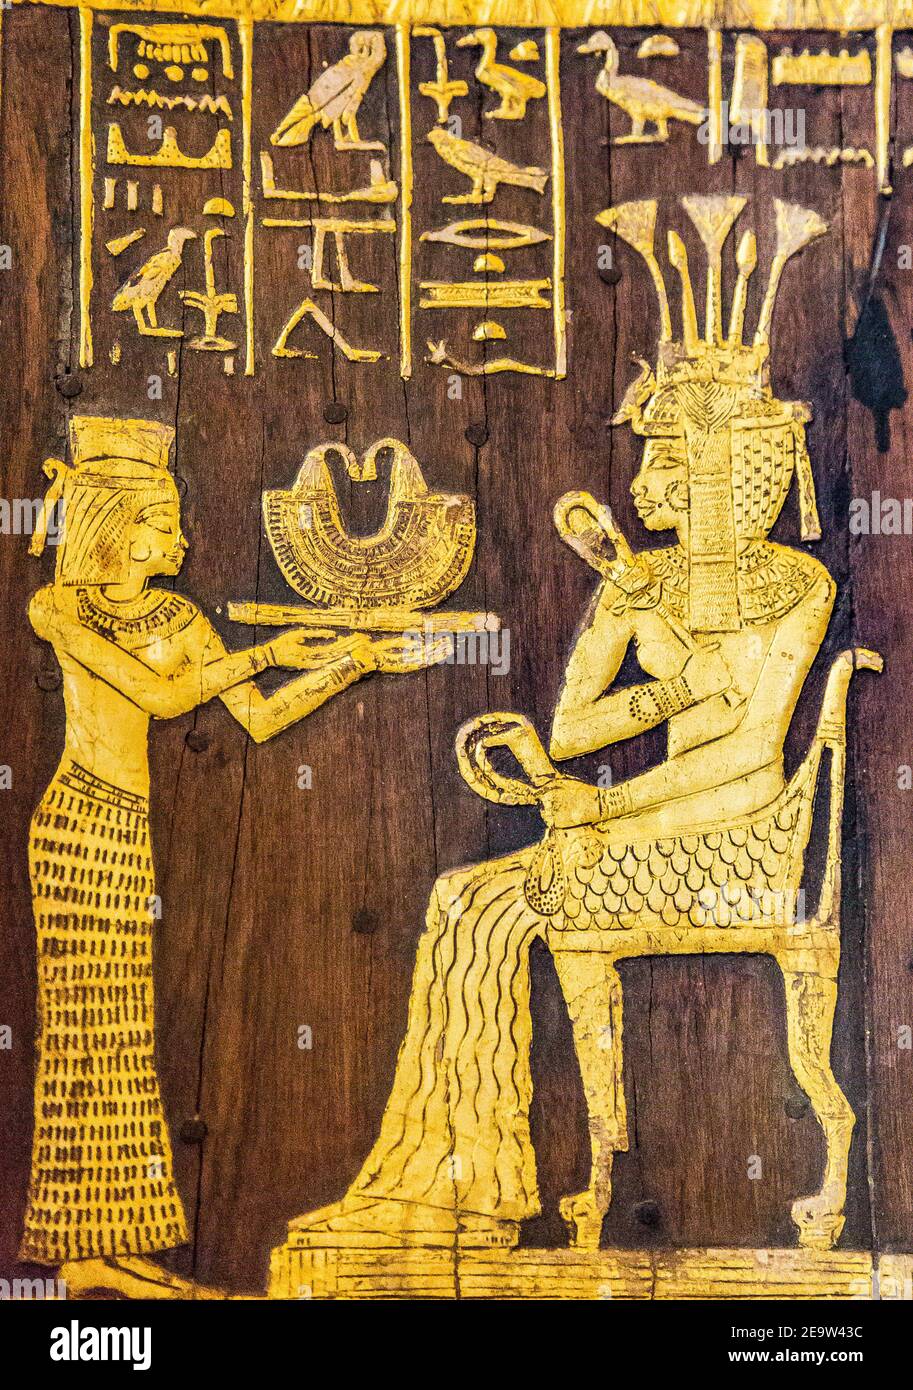 Egypt, Cairo, Egyptian Museum, from the tomb of Yuya and Thuya in Luxor : Wooden chair, with plastered and gilded decorations. Stock Photo